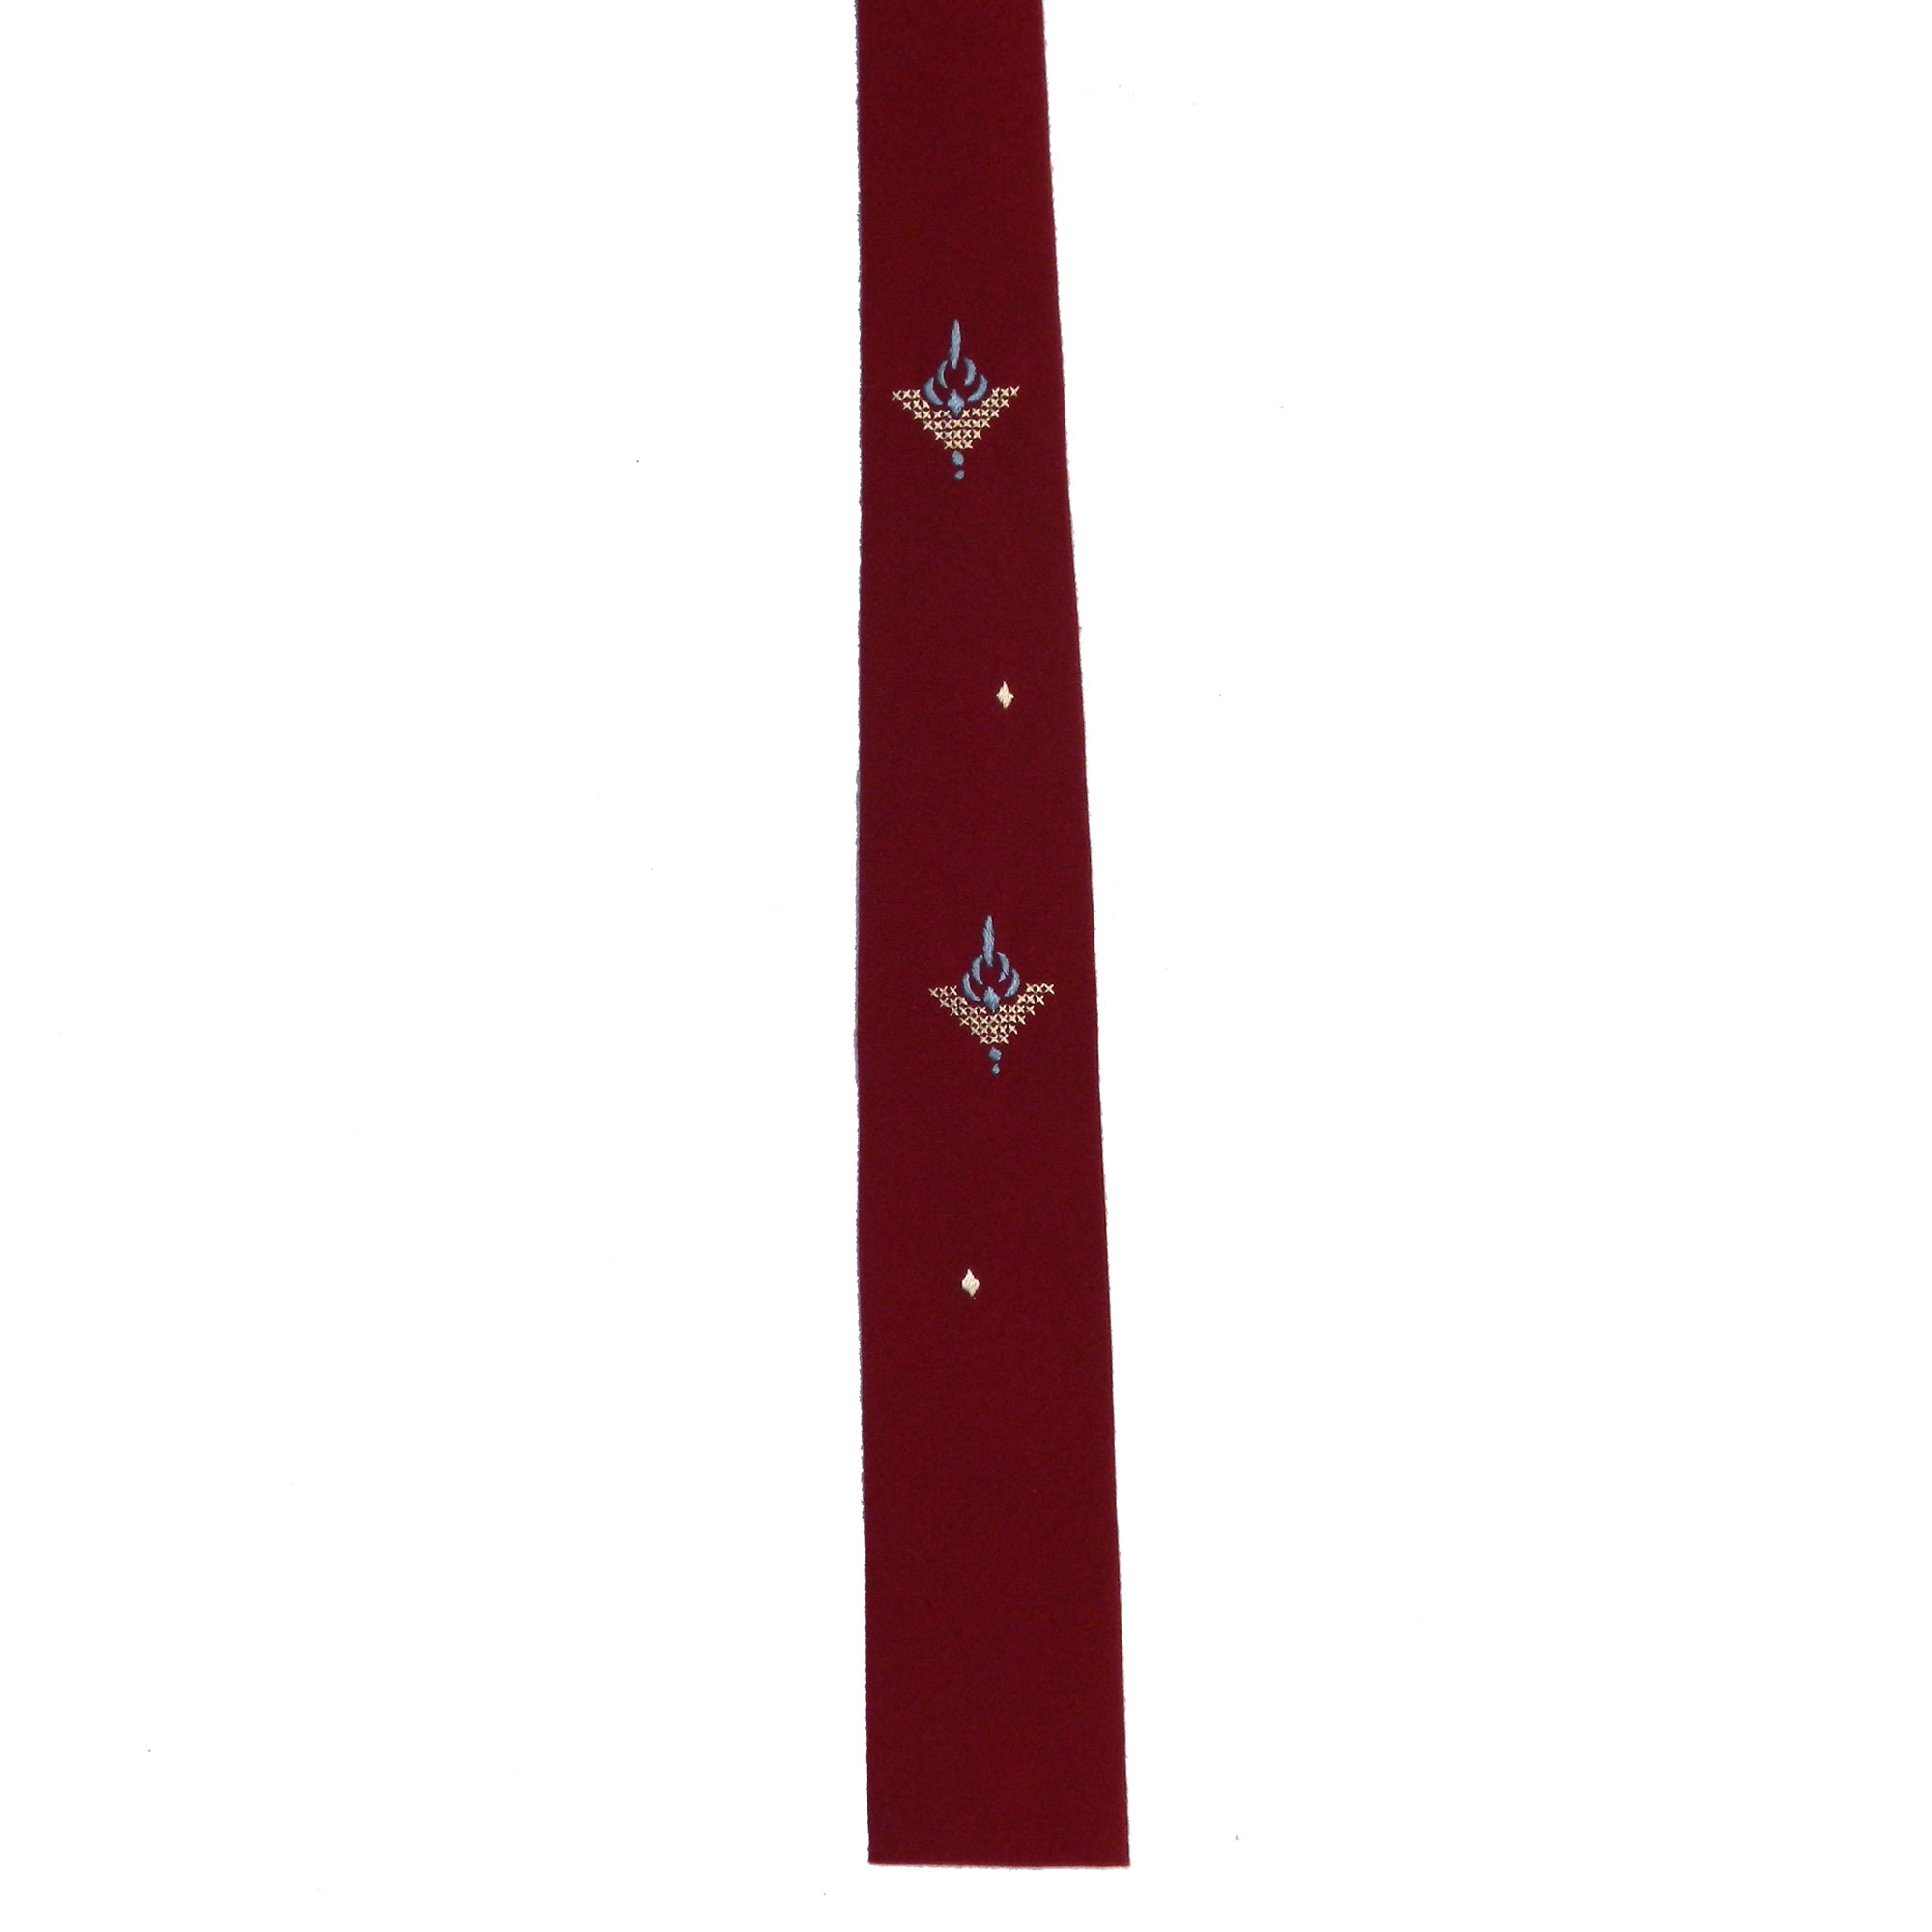 1950s embroidered tie